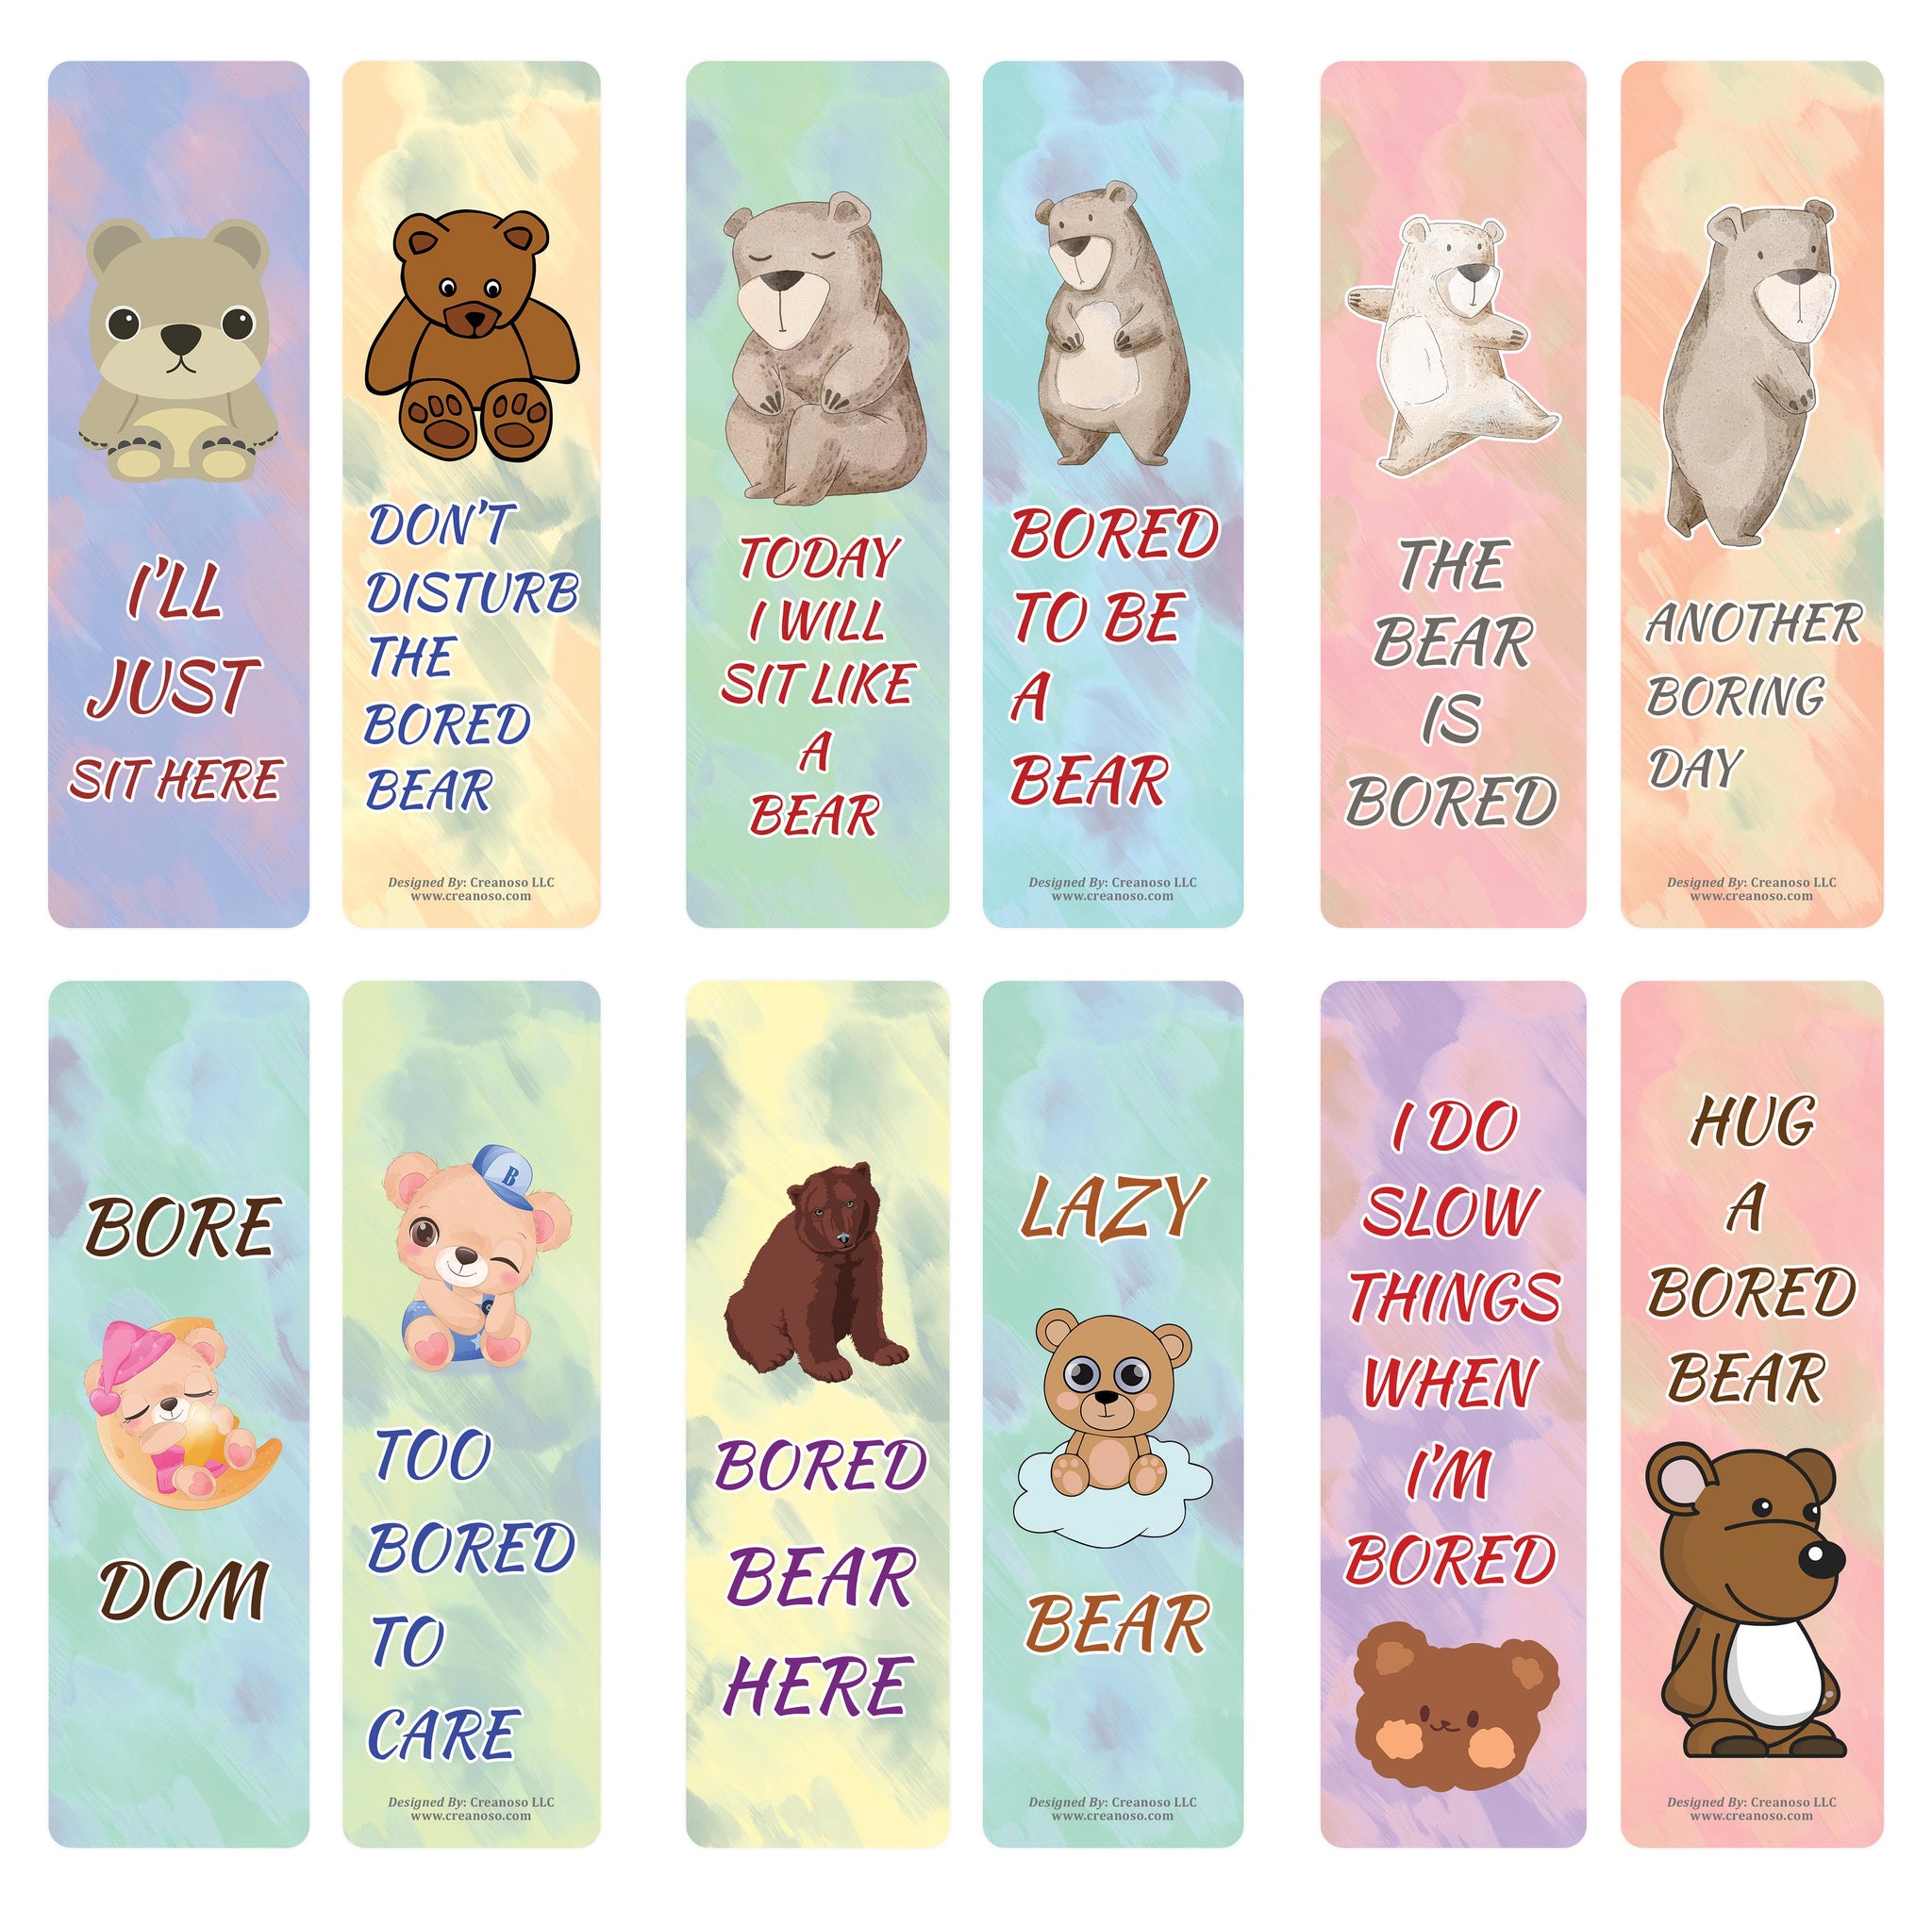 Creanoso Bored Animal Sayings Bookmarks - Bear Theme (5-Sets X 6 Cards) â€“ Daily Inspirational Card Set â€“ Interesting Book Page Clippers â€“ Great Gifts for Adults and Professionals